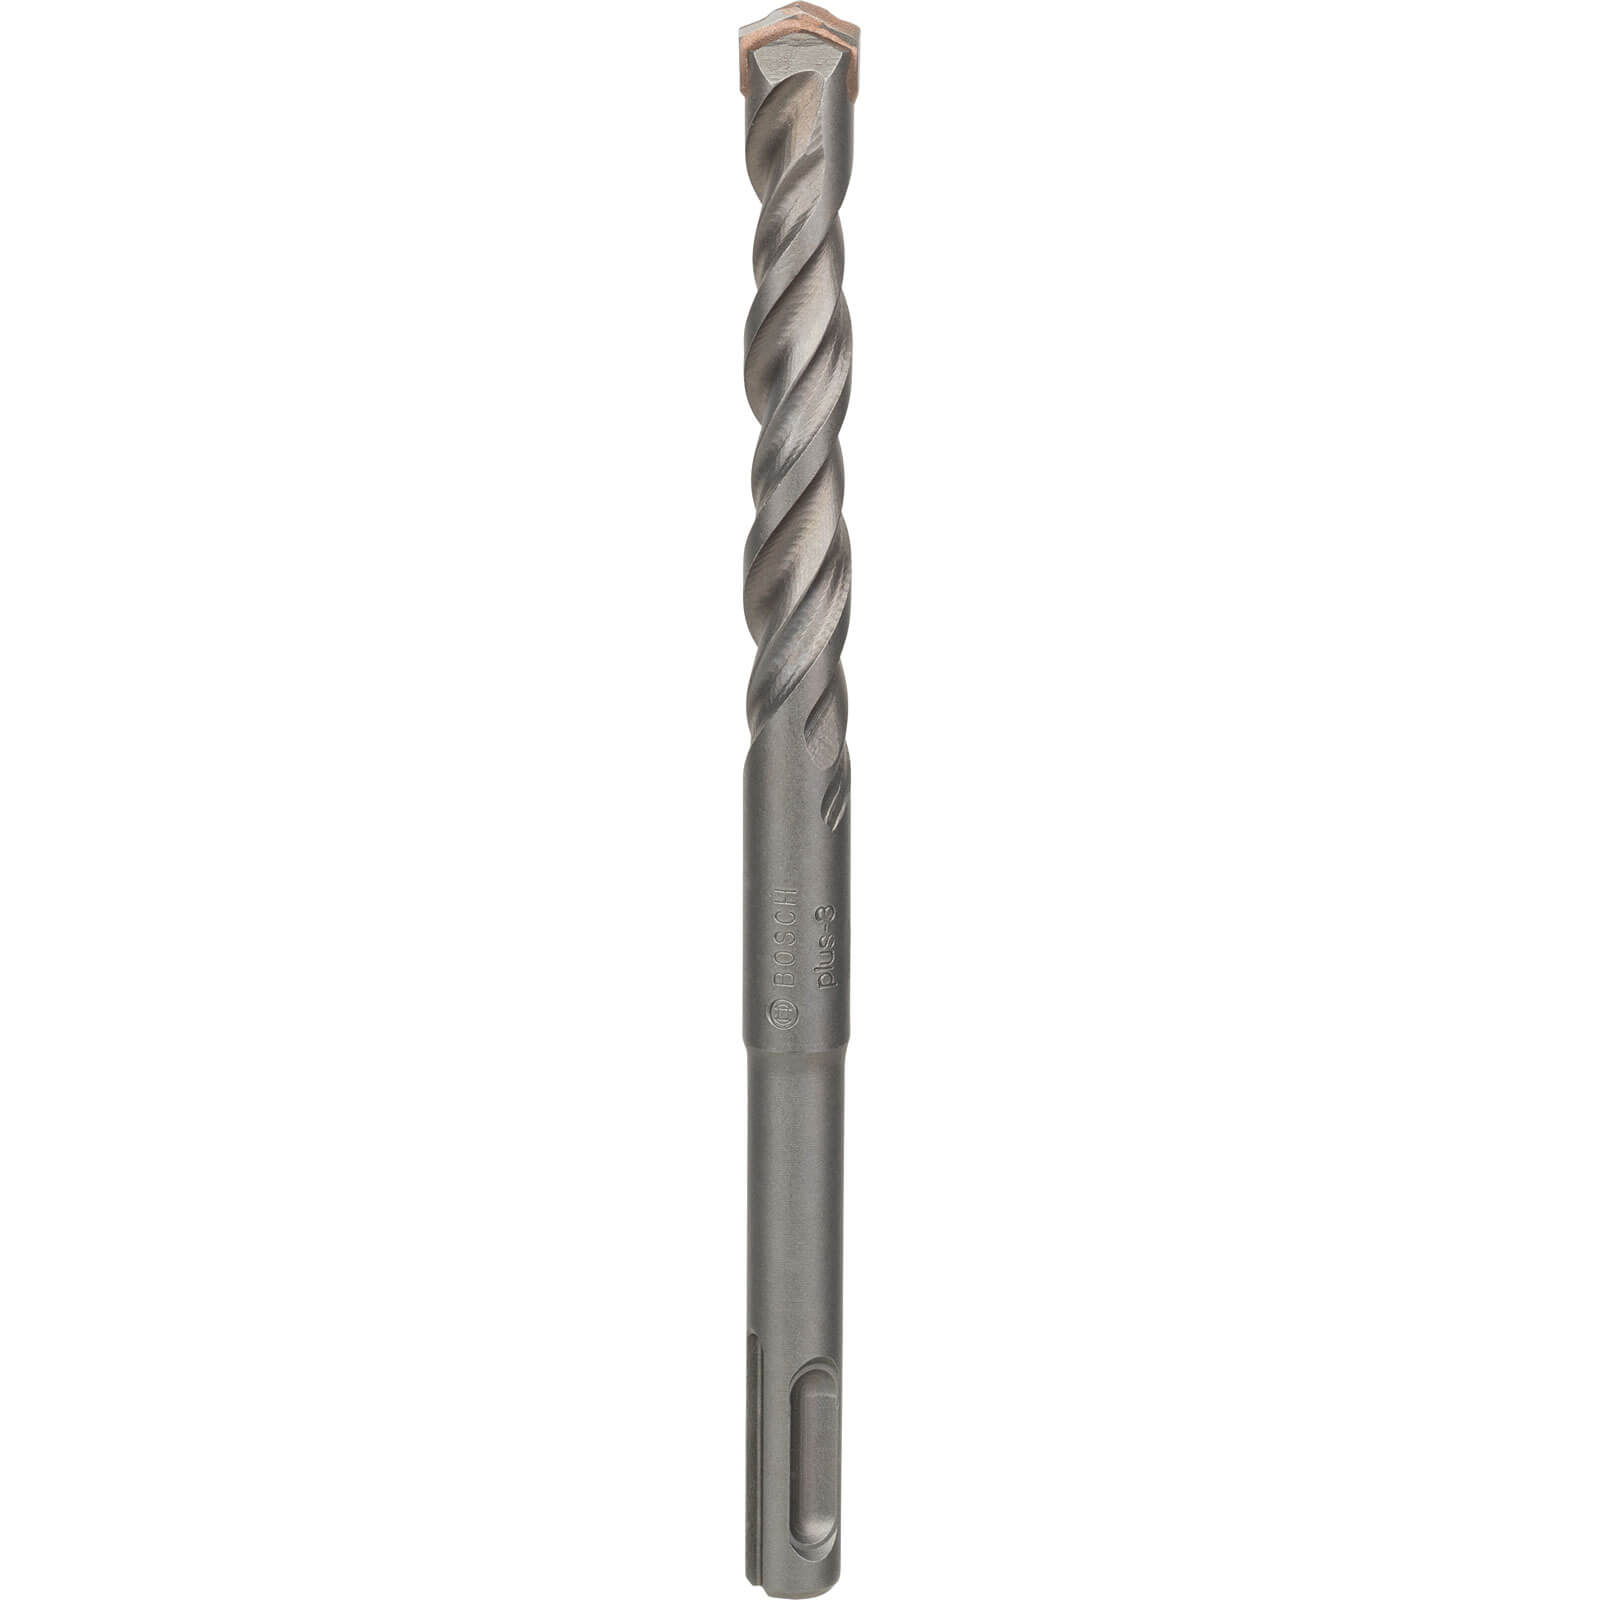 Image of Bosch Series 3 SDS Plus Masonry Drill Bit 12mm 160mm Pack of 1